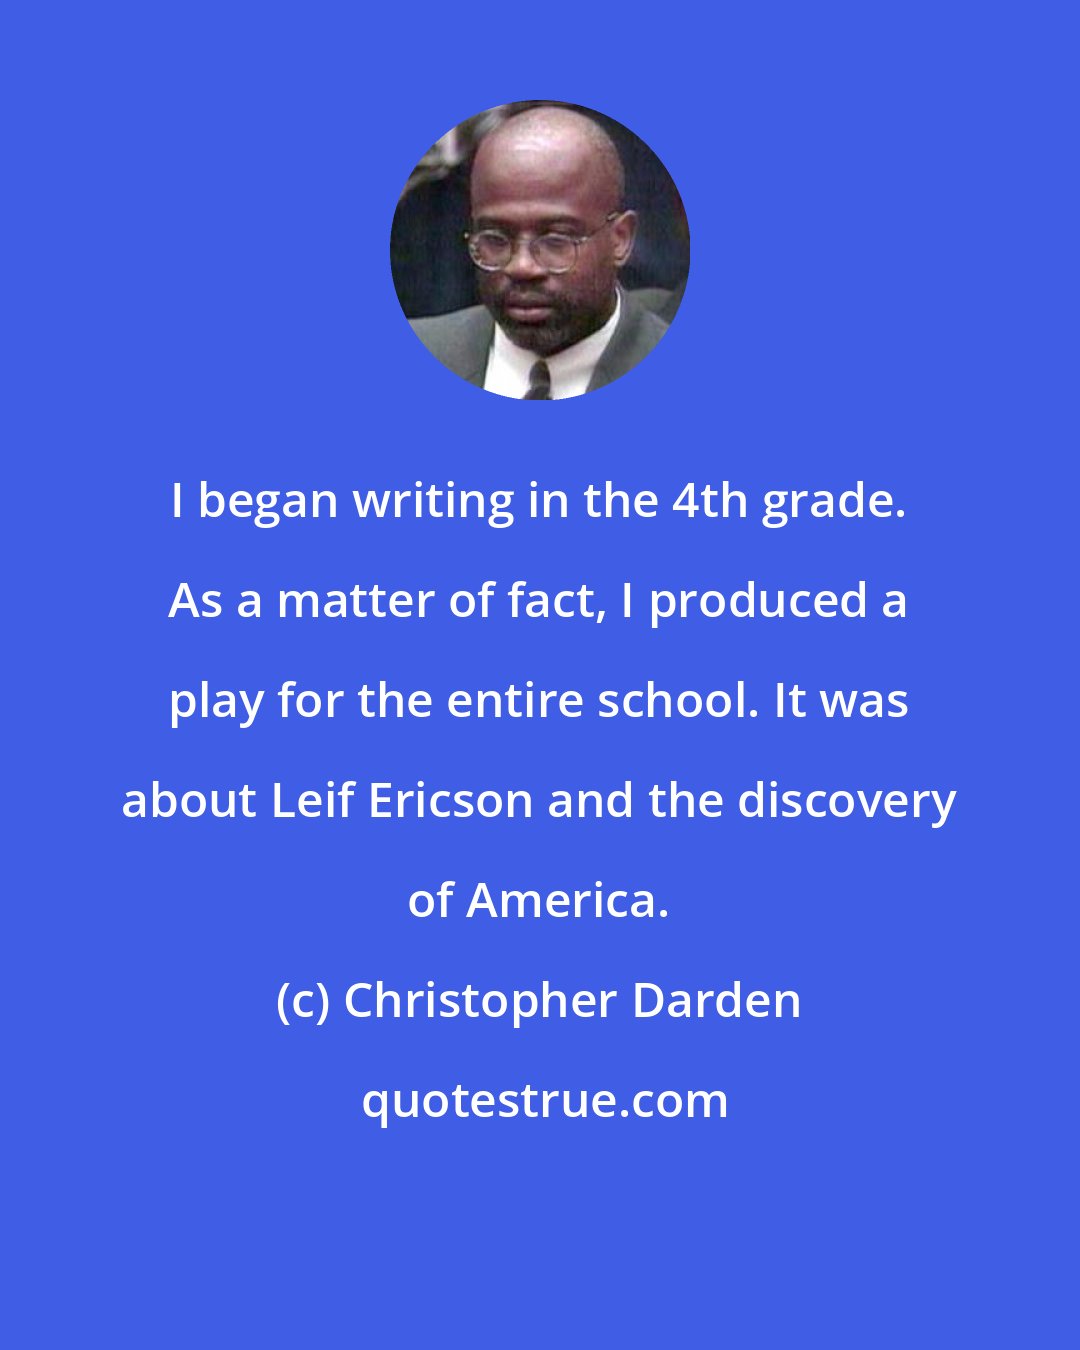 Christopher Darden: I began writing in the 4th grade. As a matter of fact, I produced a play for the entire school. It was about Leif Ericson and the discovery of America.